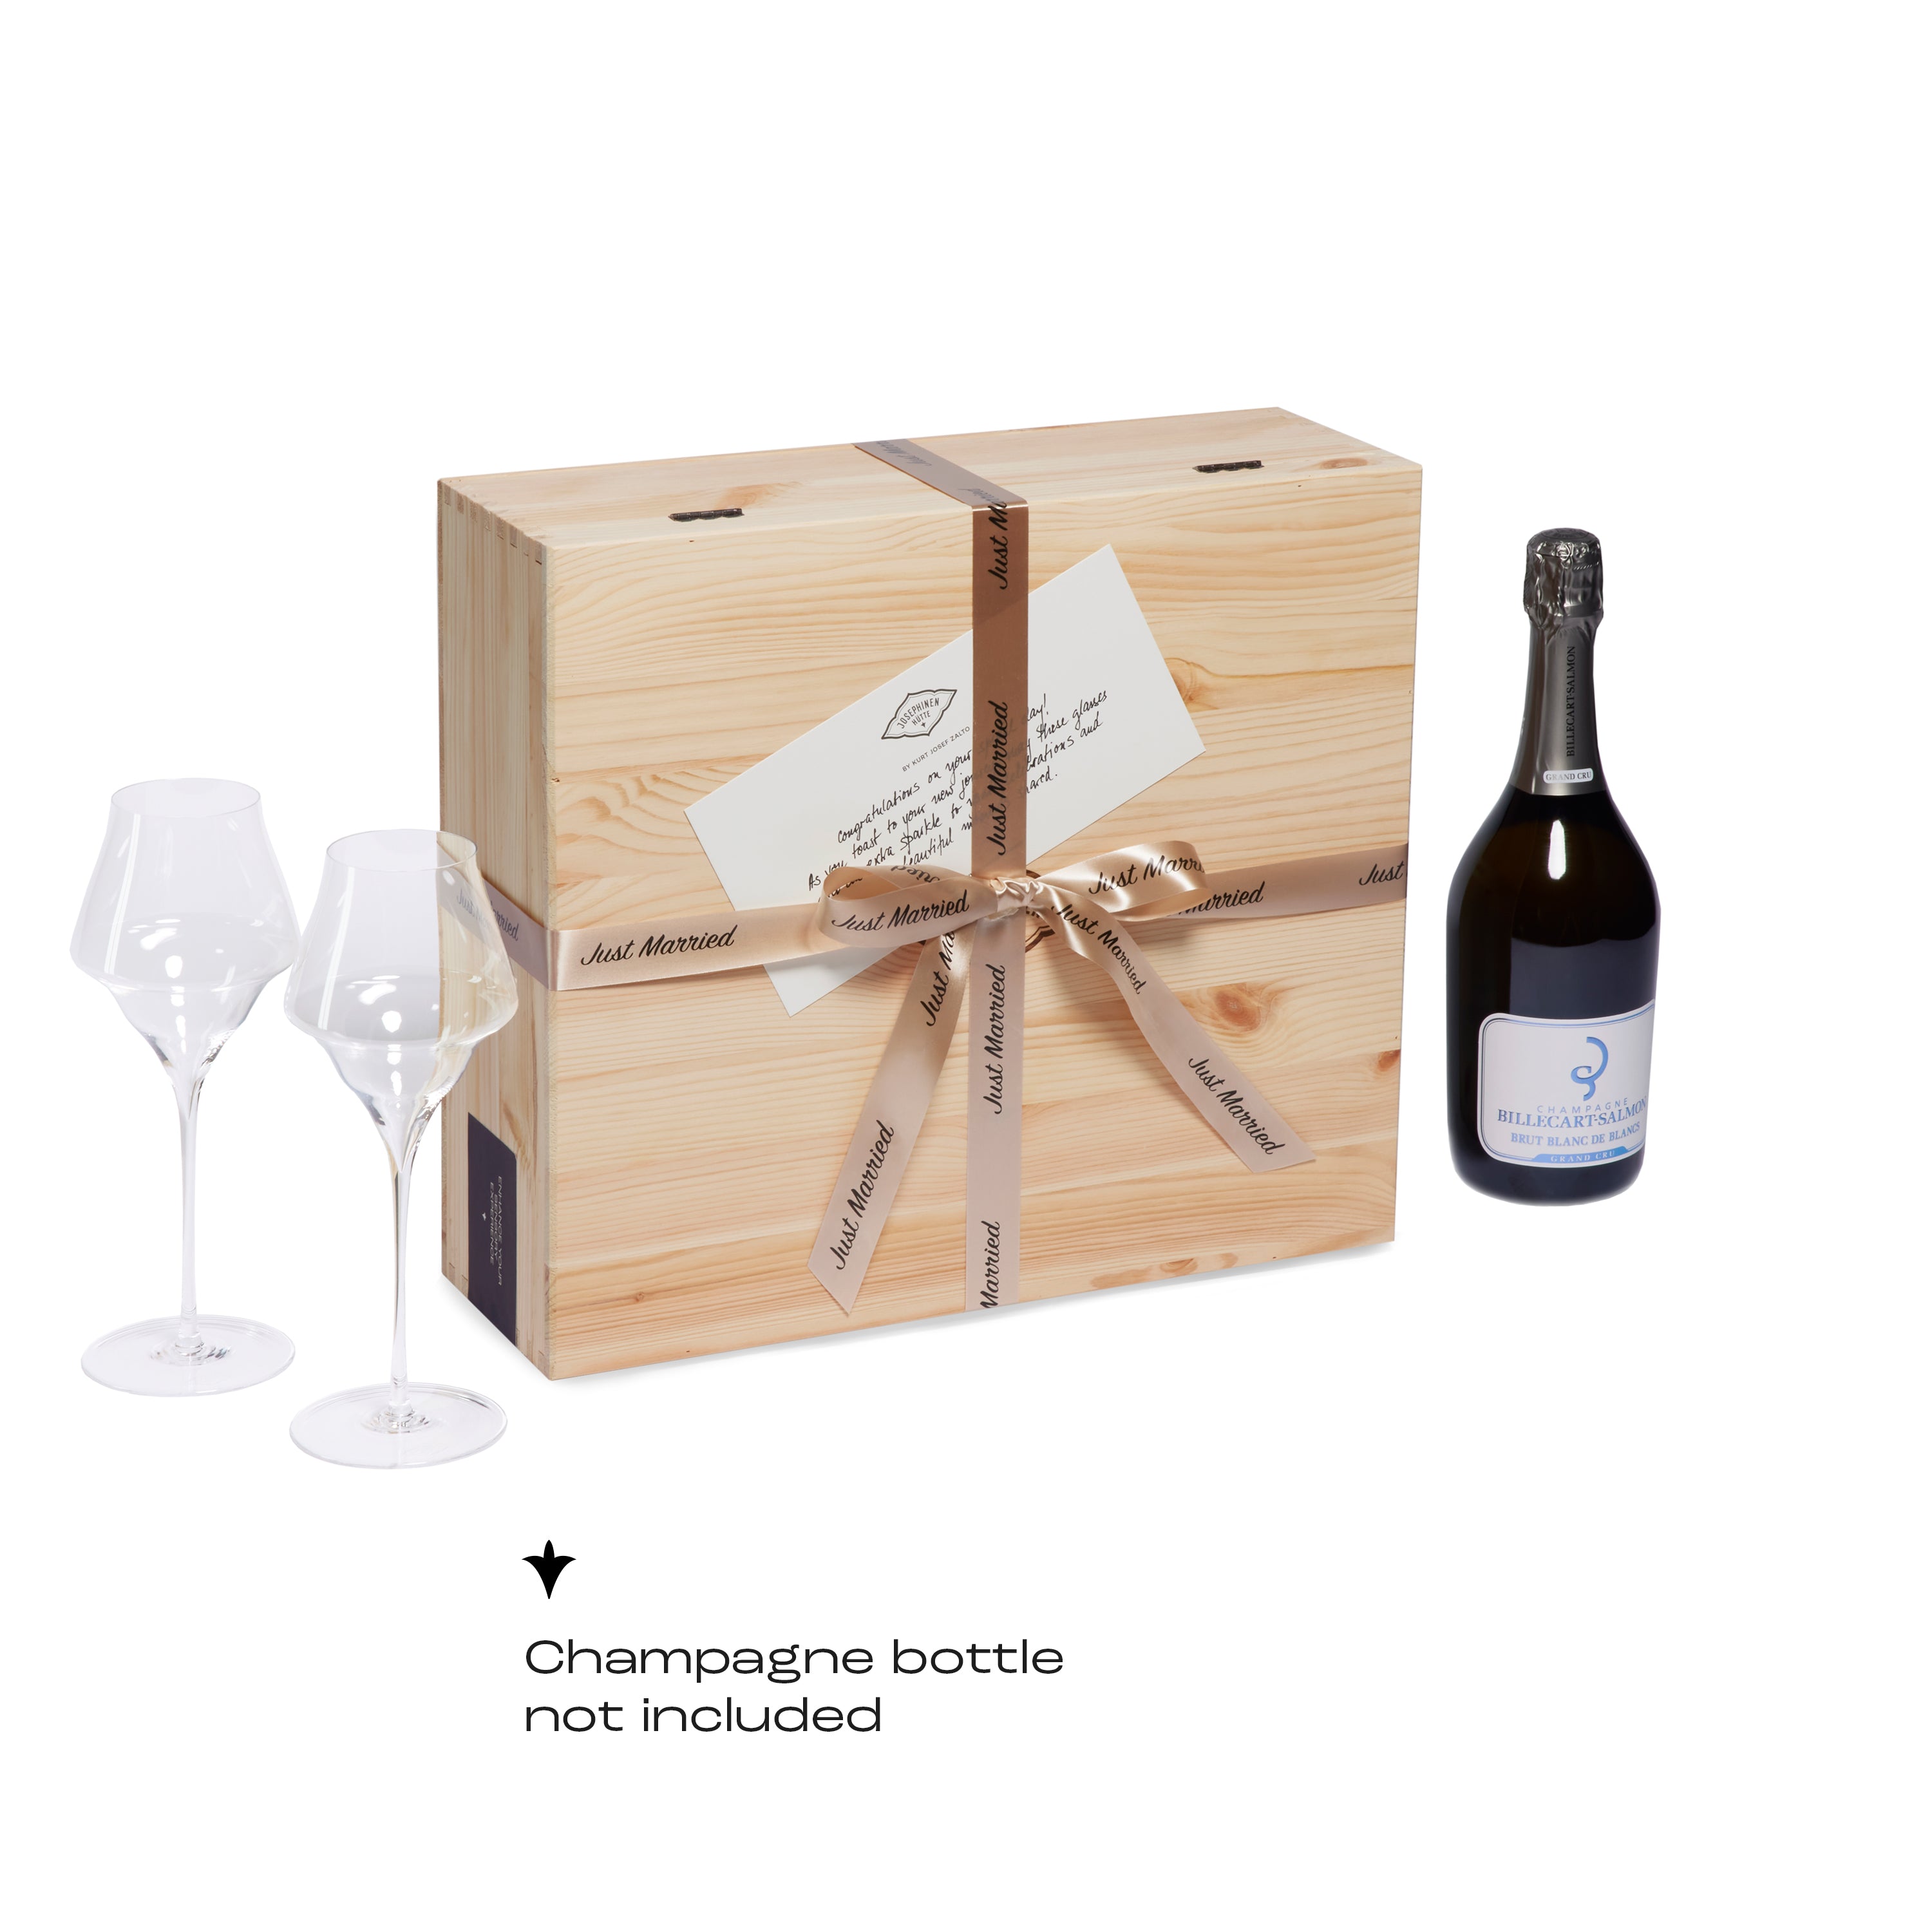 A Josephinenhütte wedding gift box set, showing the wooden box tied with a "Just Married" ribbon. The set includes two JOSEPHINE No 4 champagne glasses. Note that the champagne bottle is not included.